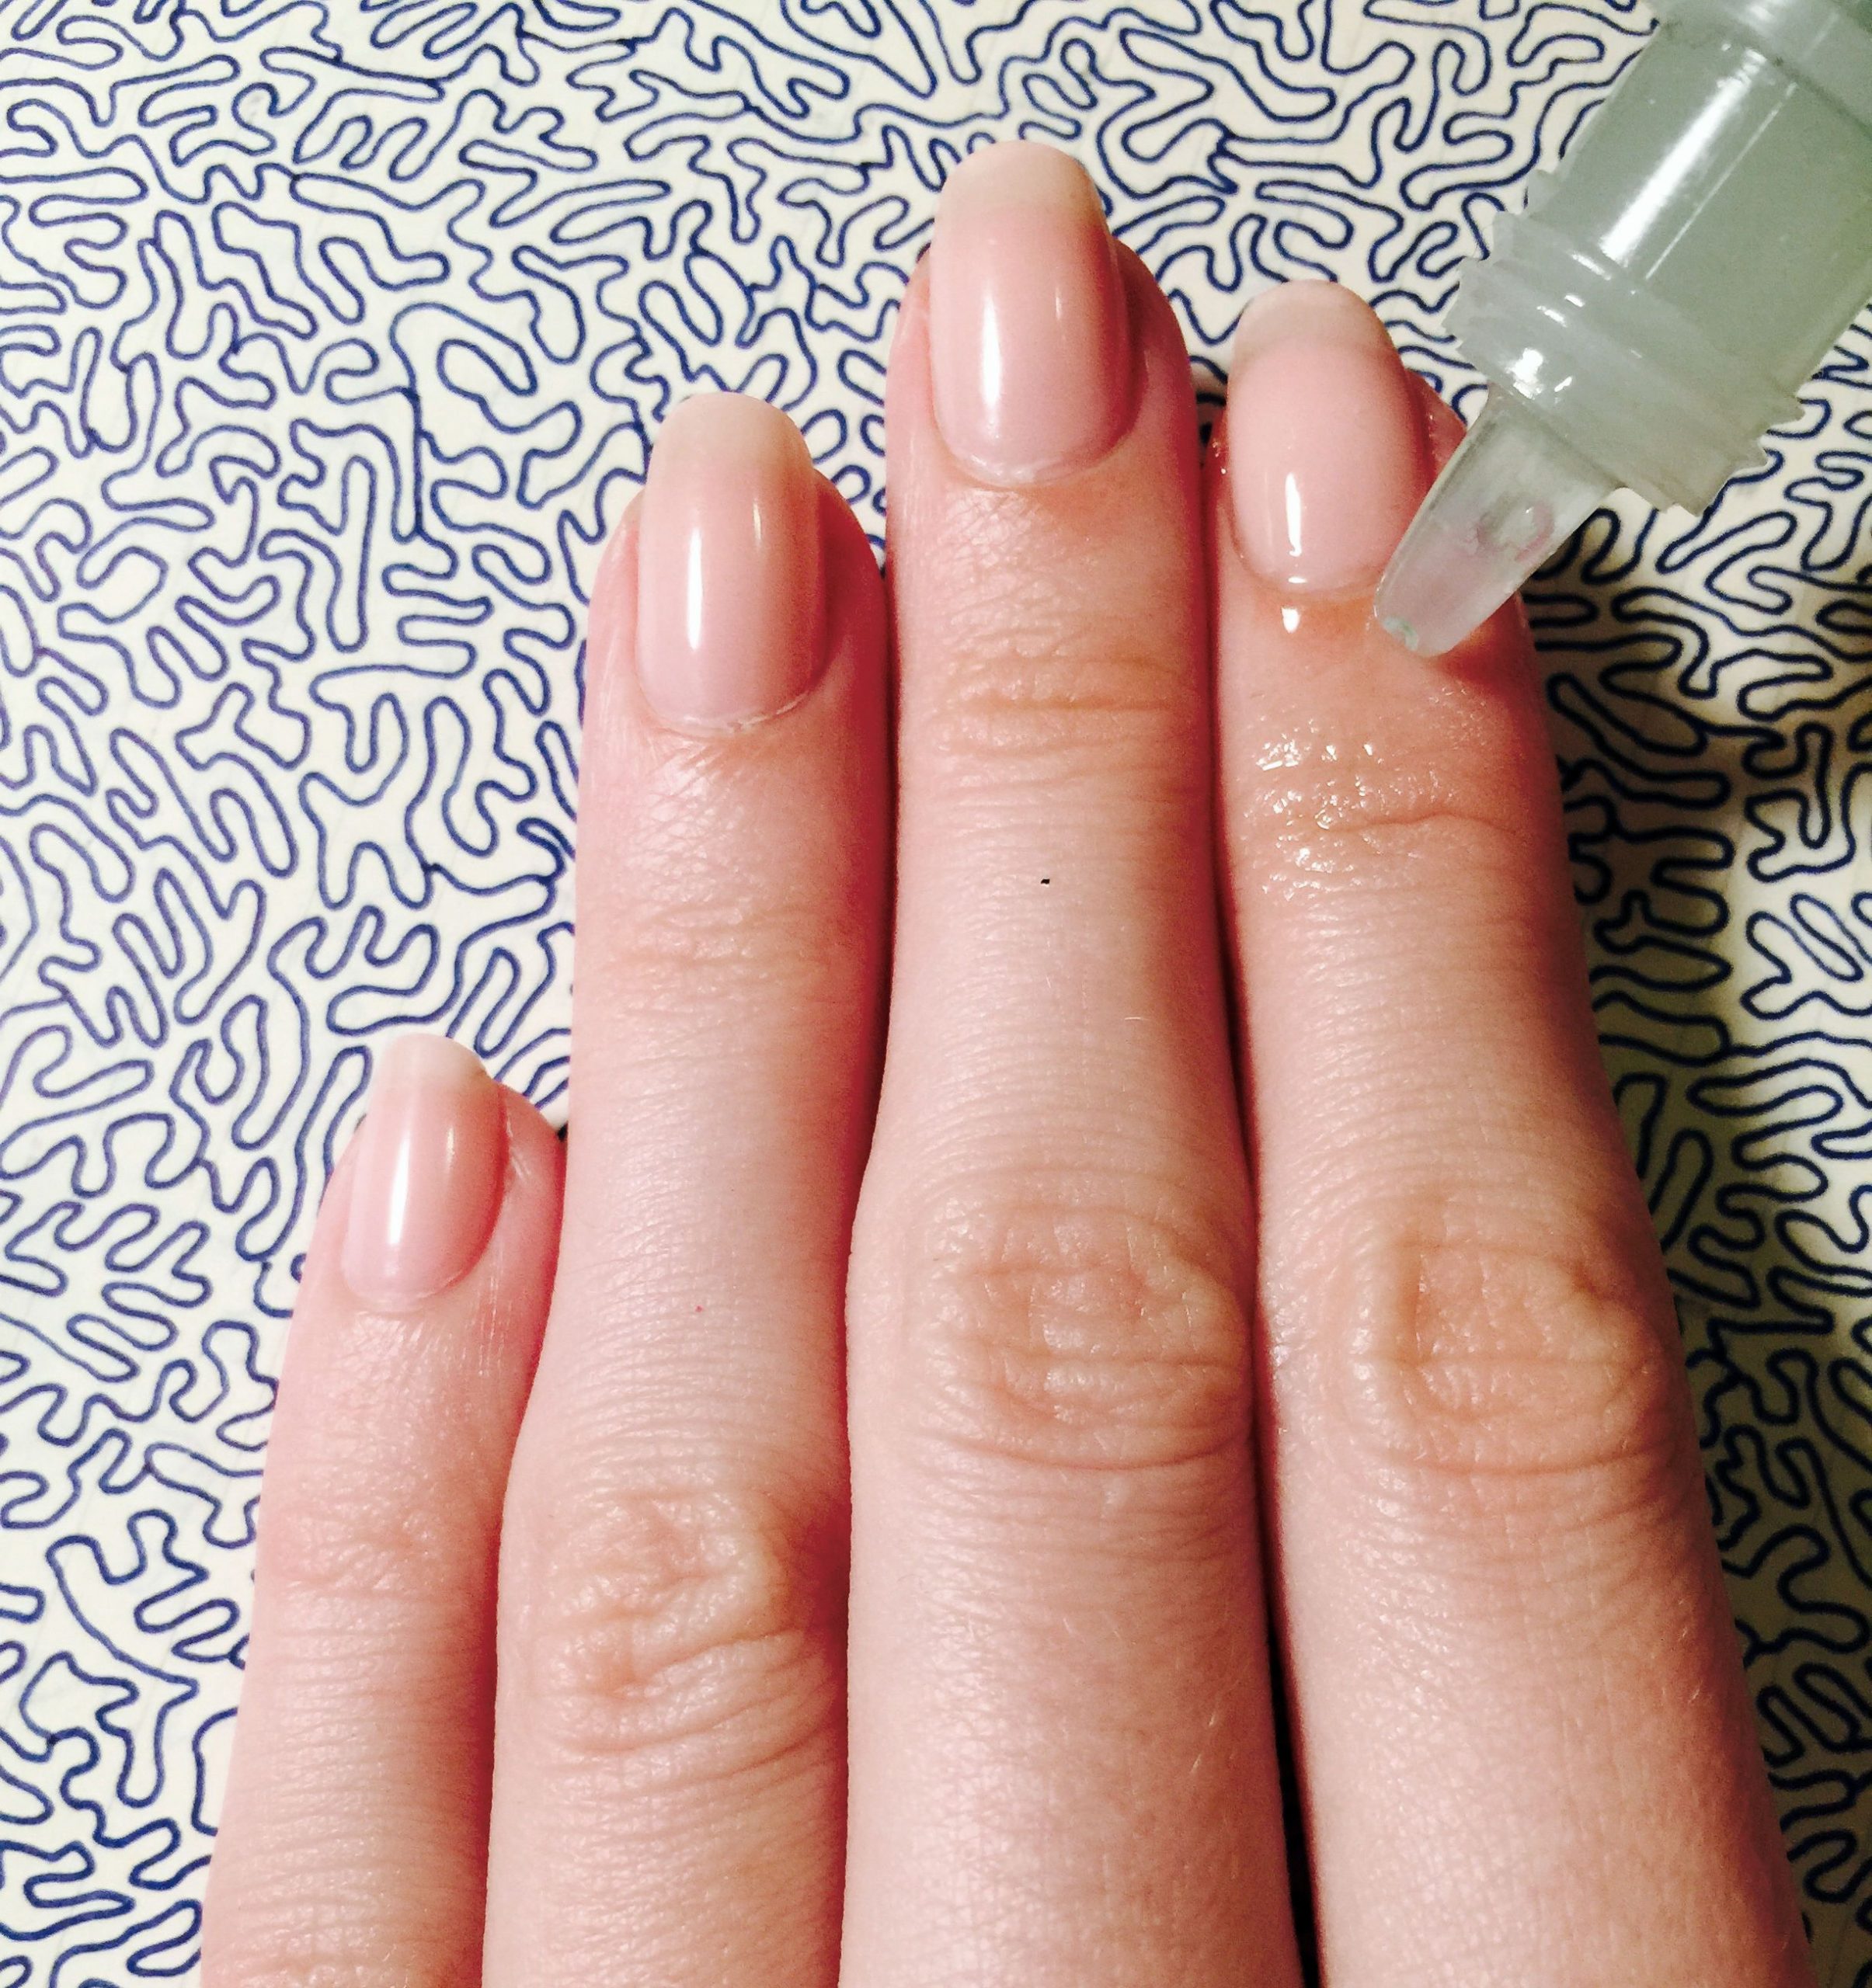 Tips for Healthy, Strong Nails - The Best Nail Care Tips